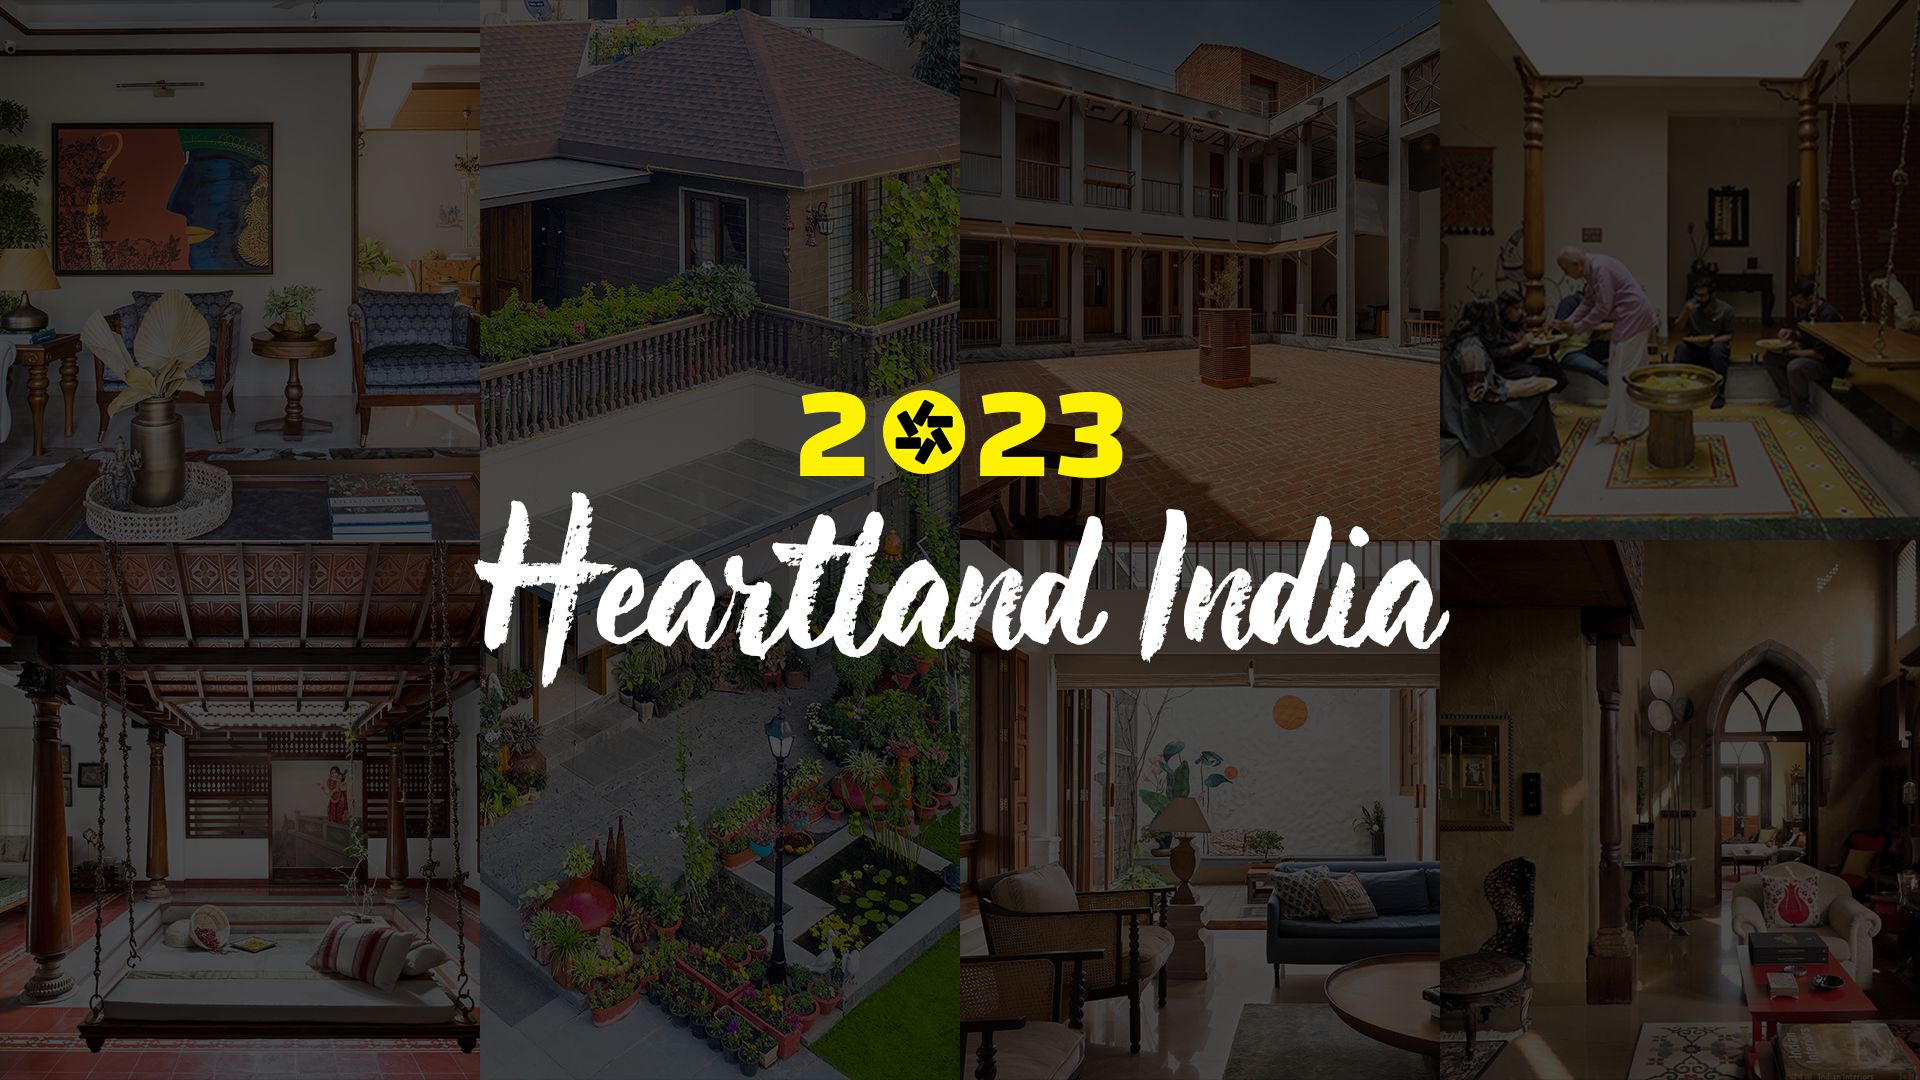 2023: Watch 7 Home Tours that Tell Tales of Heartland India